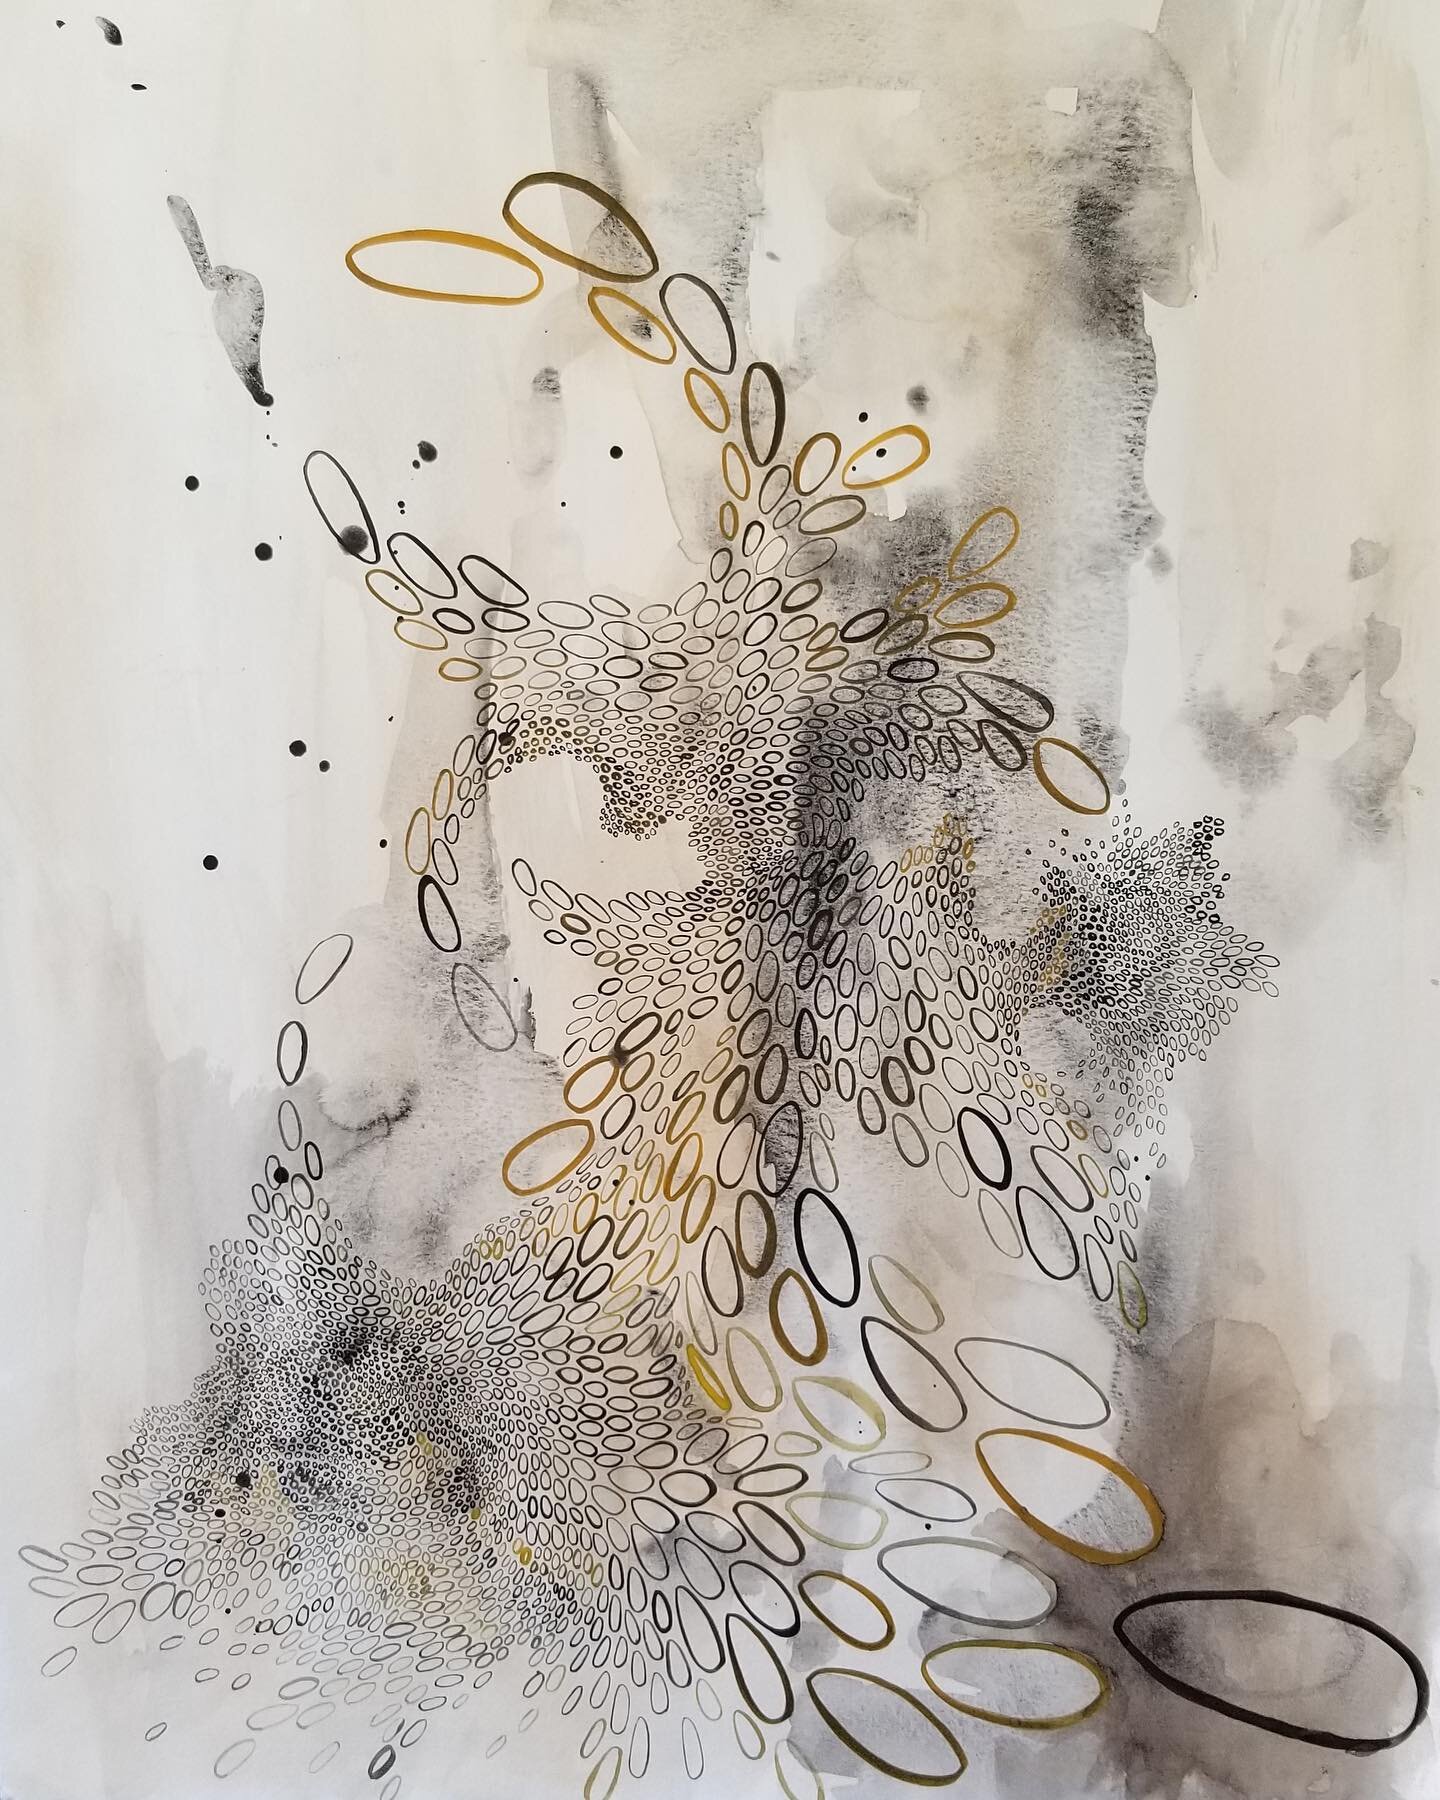 See these beautiful artworks by artist Joyce Nojima in person at The Katz Snyder Gallery @jccsf 

&ldquo;Wander Woman 3&rdquo;
Curated by: Rea Lynn de Guzman @rayuh_lynn 
Exhibition Dates: January 18 - April 16,  2023

Joyce Nojima&rsquo;s Artist Sta